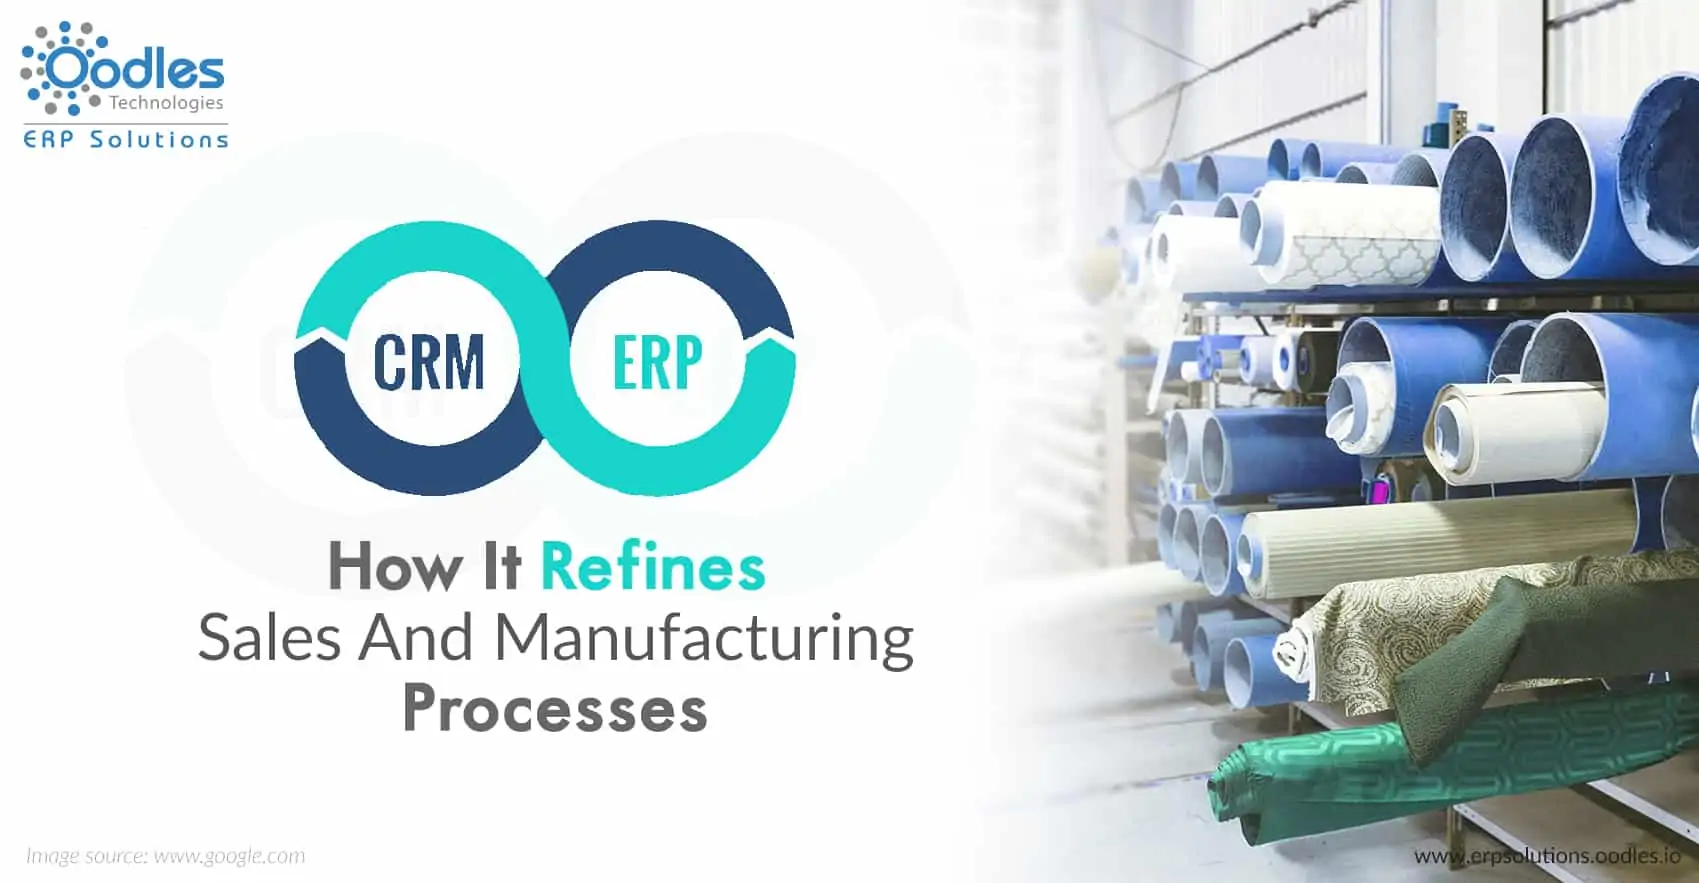 CRM and ERP : How It Refines Sales And Manufacturing Processes